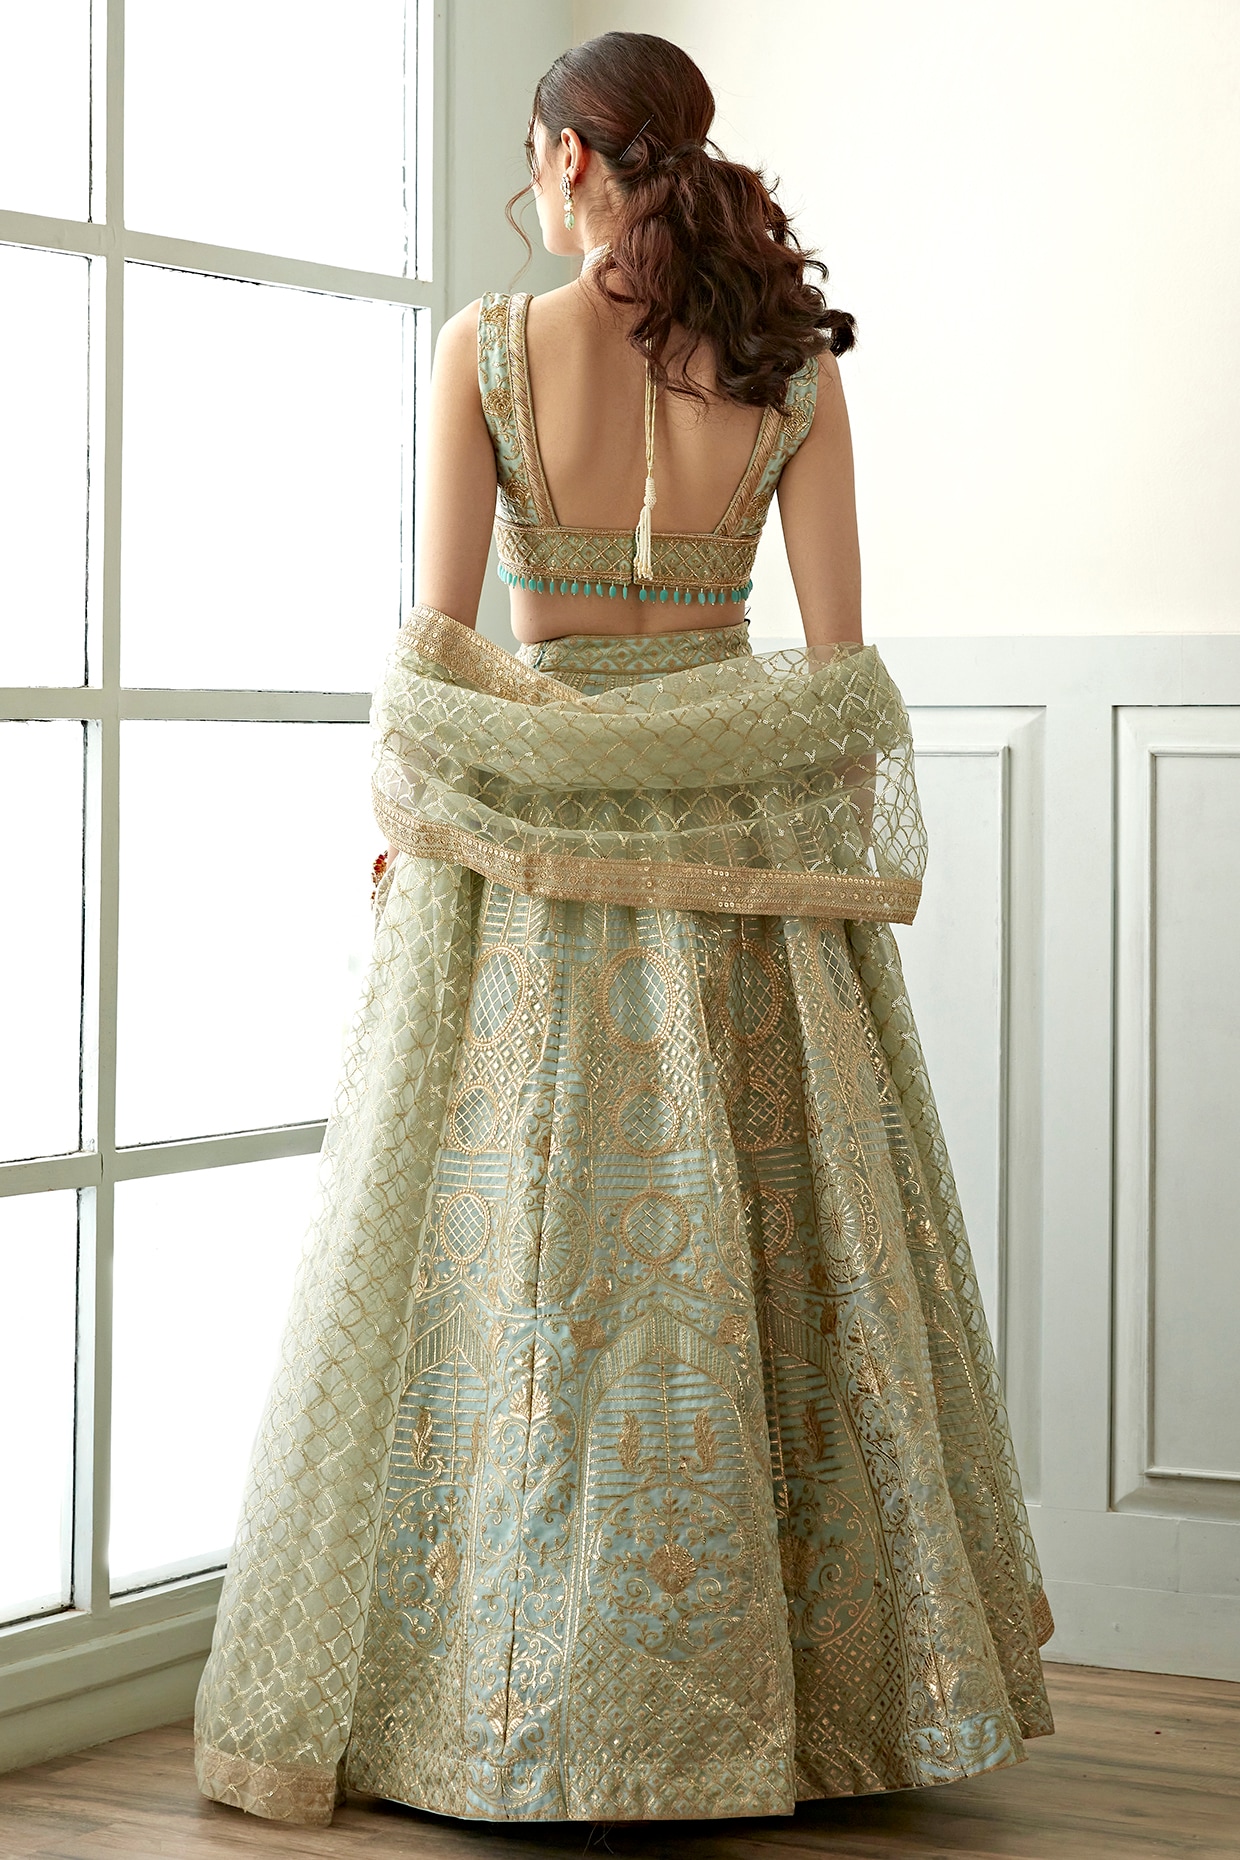 Turquoise & Ivory Embroidered Lehenga Set Design by Suhino at Pernia's Pop  Up Shop 2024